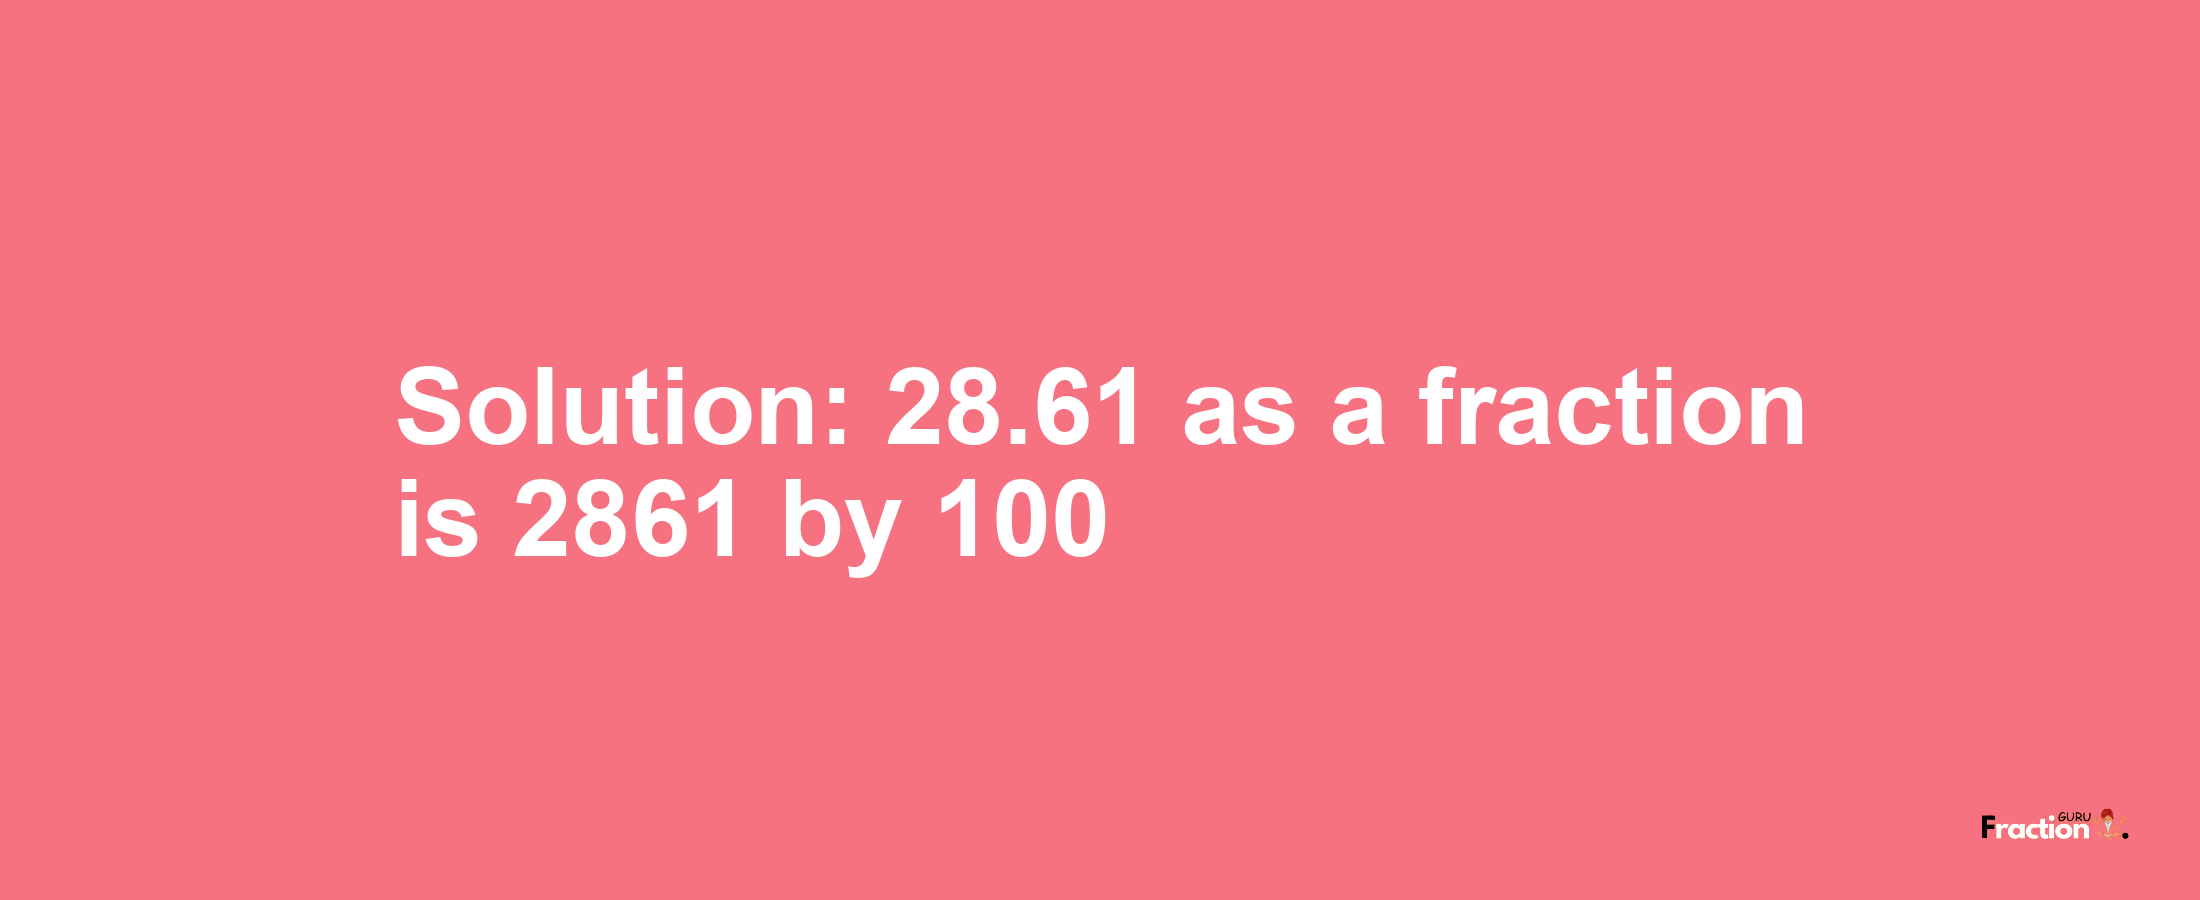 Solution:28.61 as a fraction is 2861/100